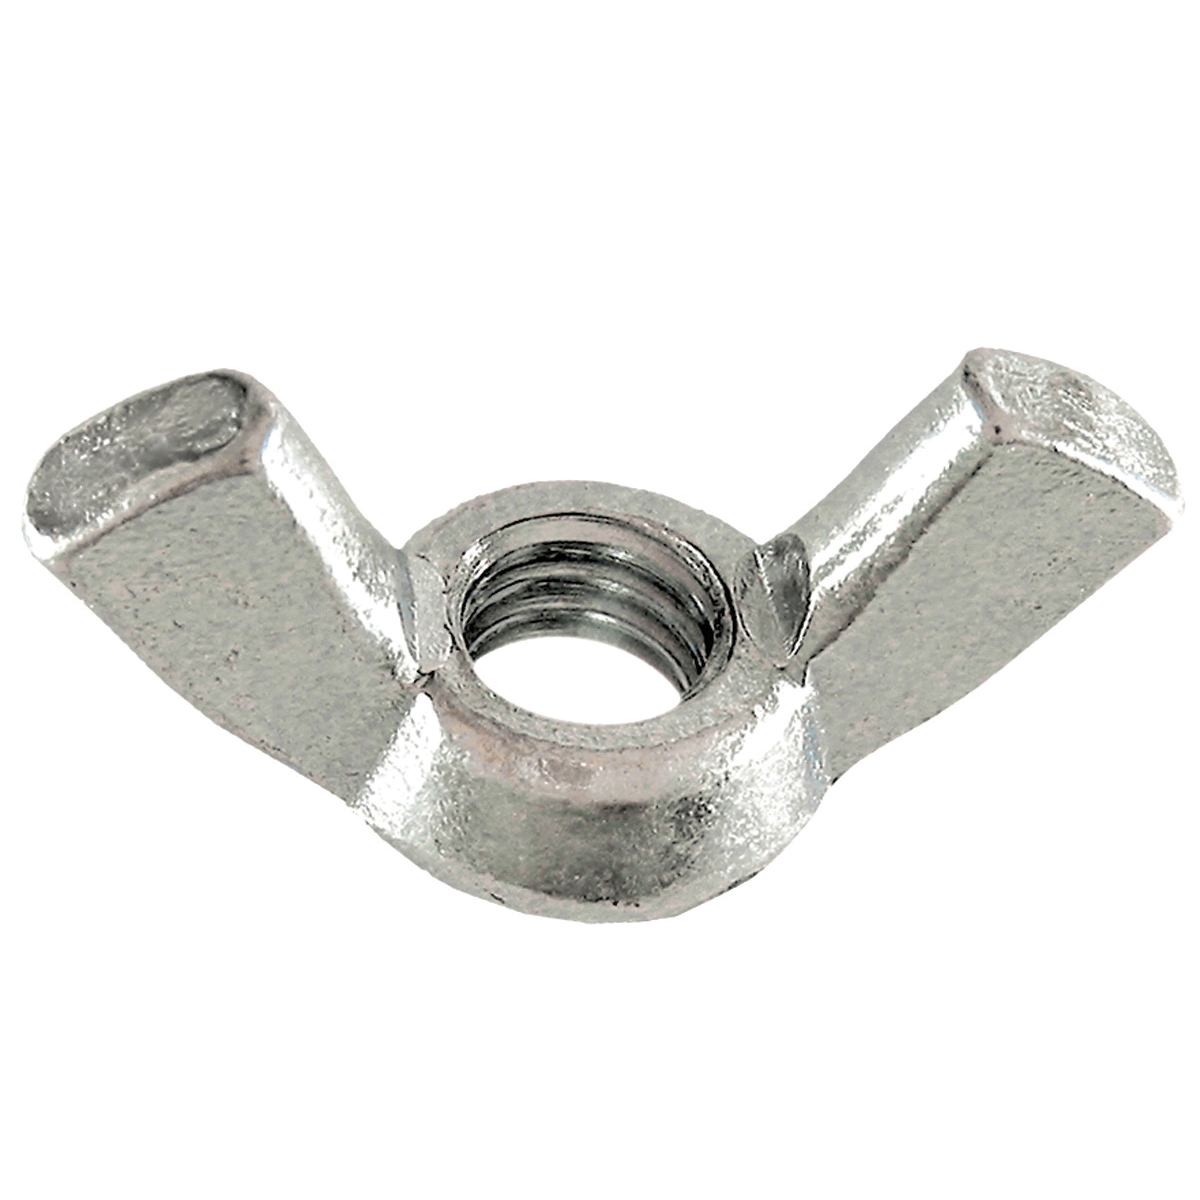 Paulin® 5038-022 Wing Nut, 1/2-13, Stainless Steel, 18-8 Material Grade